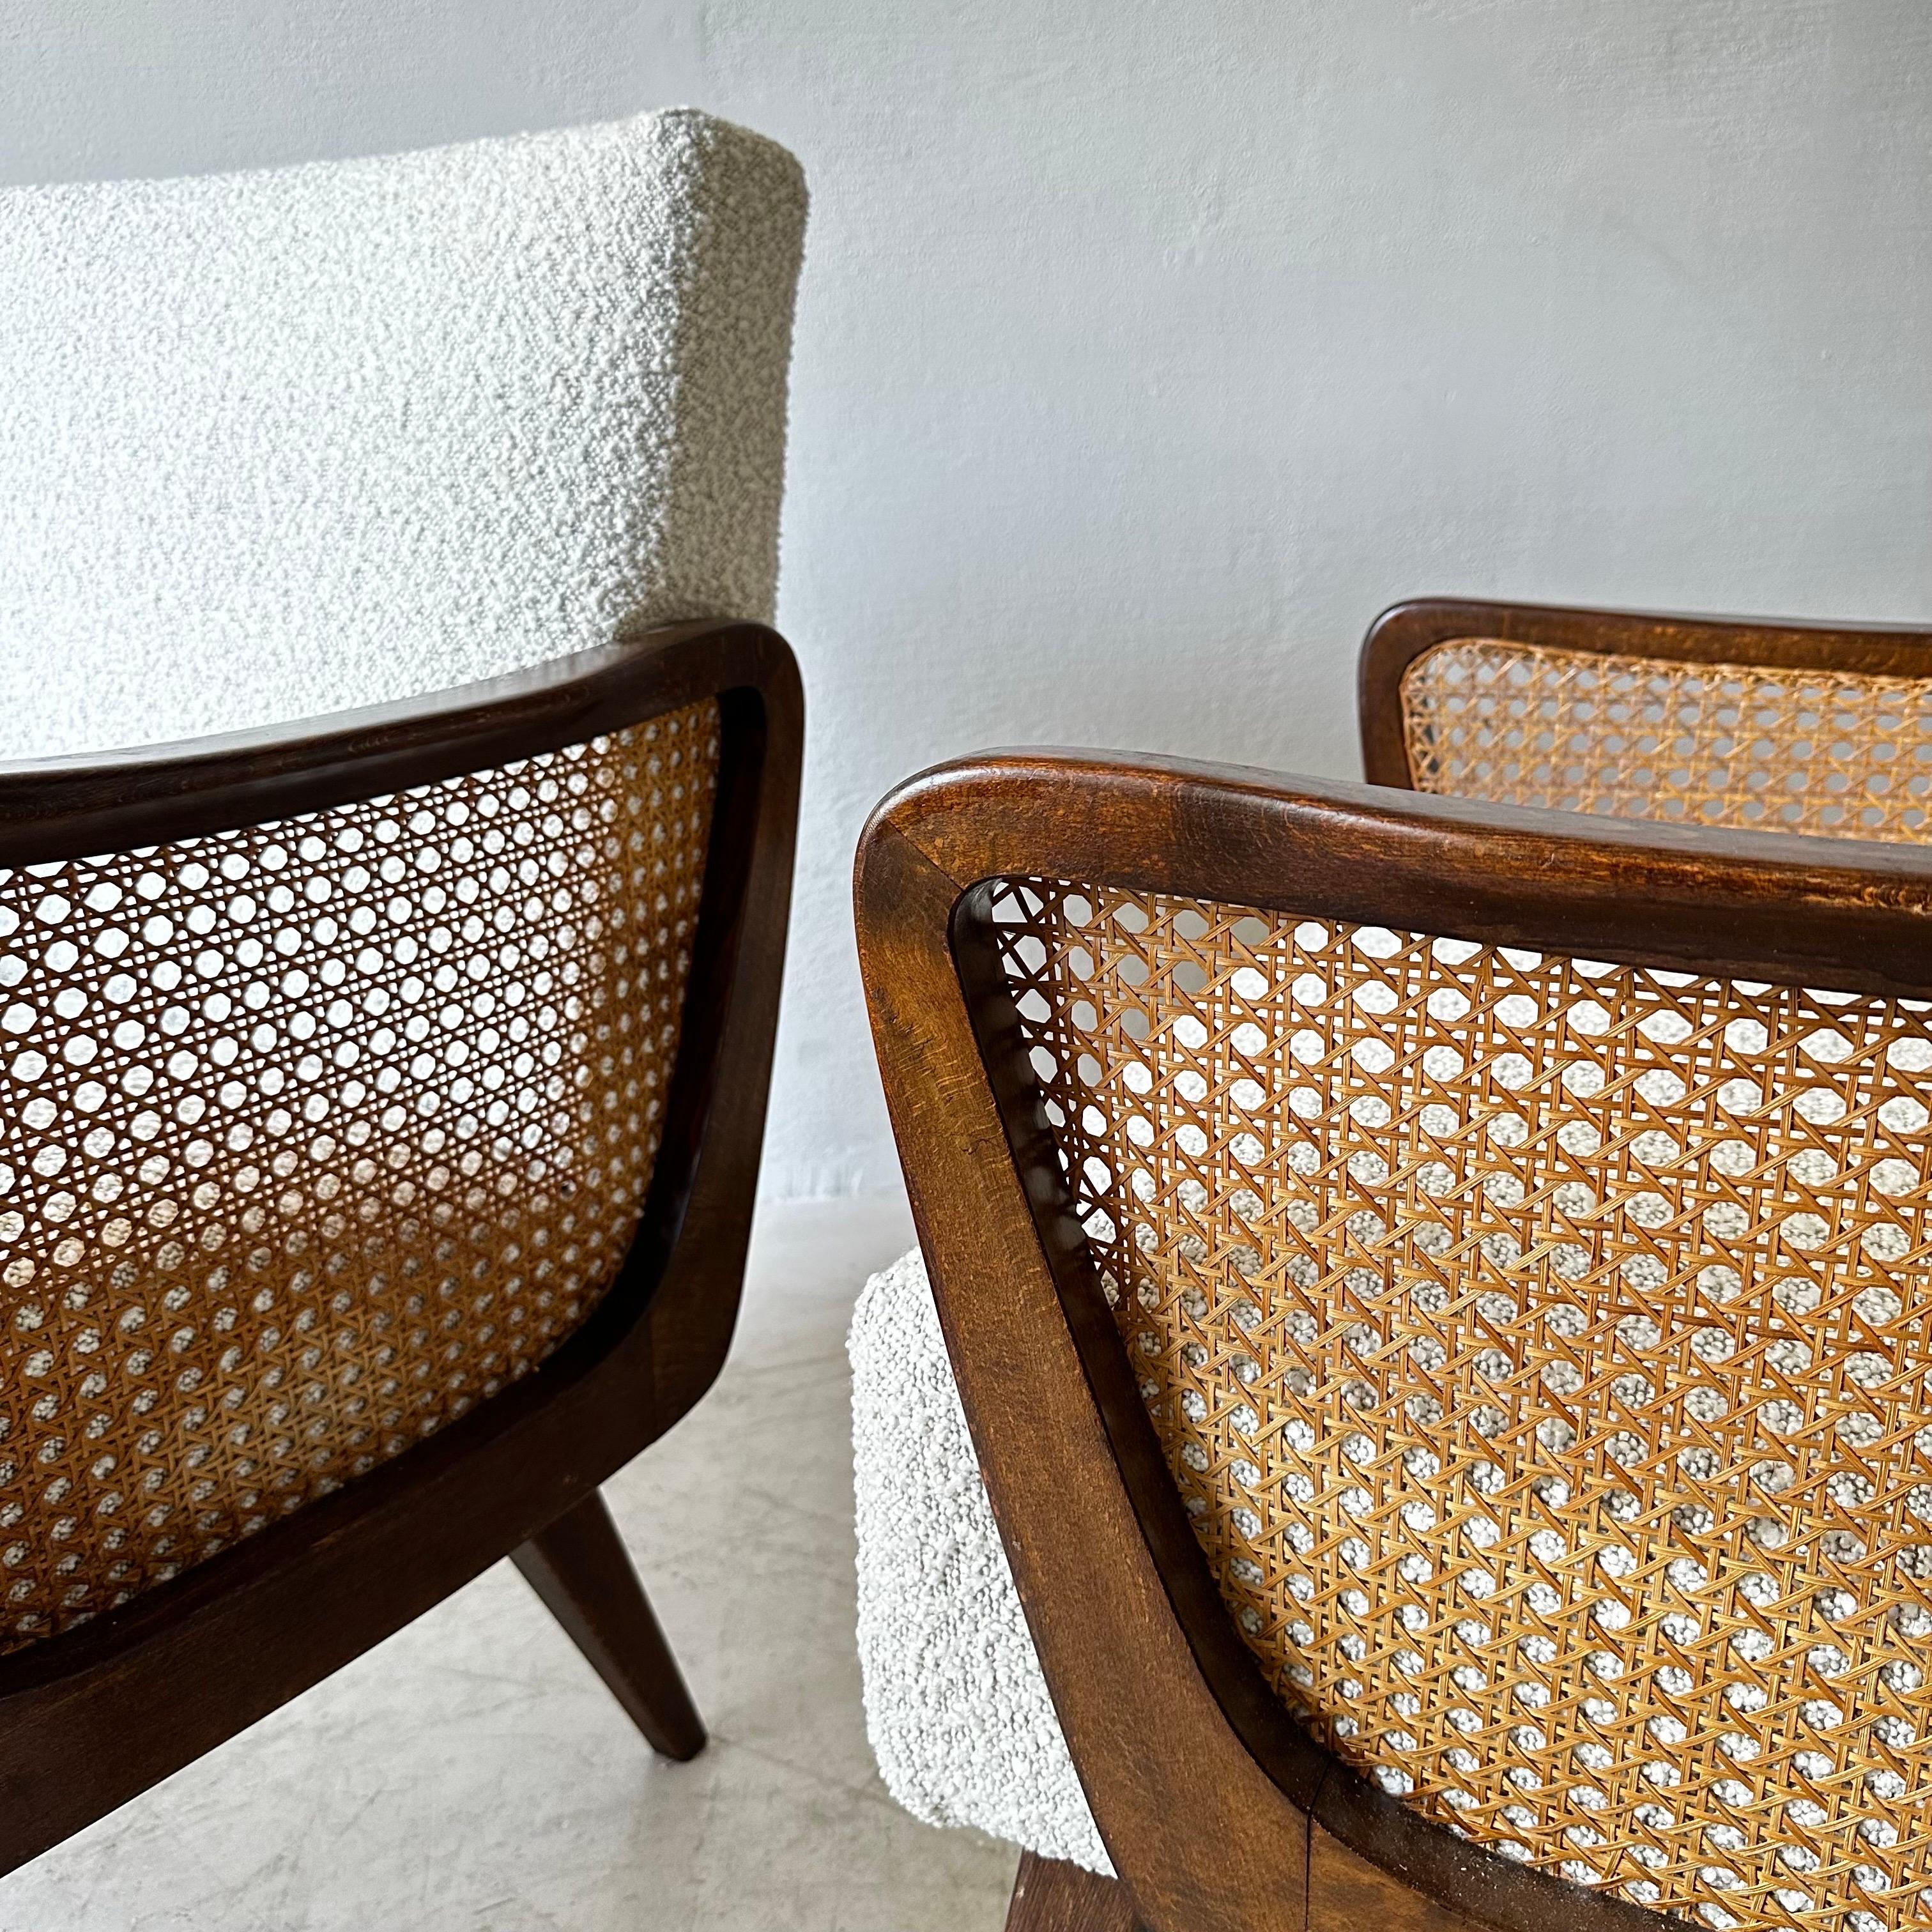 Austrian Arm Chairs in Boucle and Wicker, 1950s For Sale 5